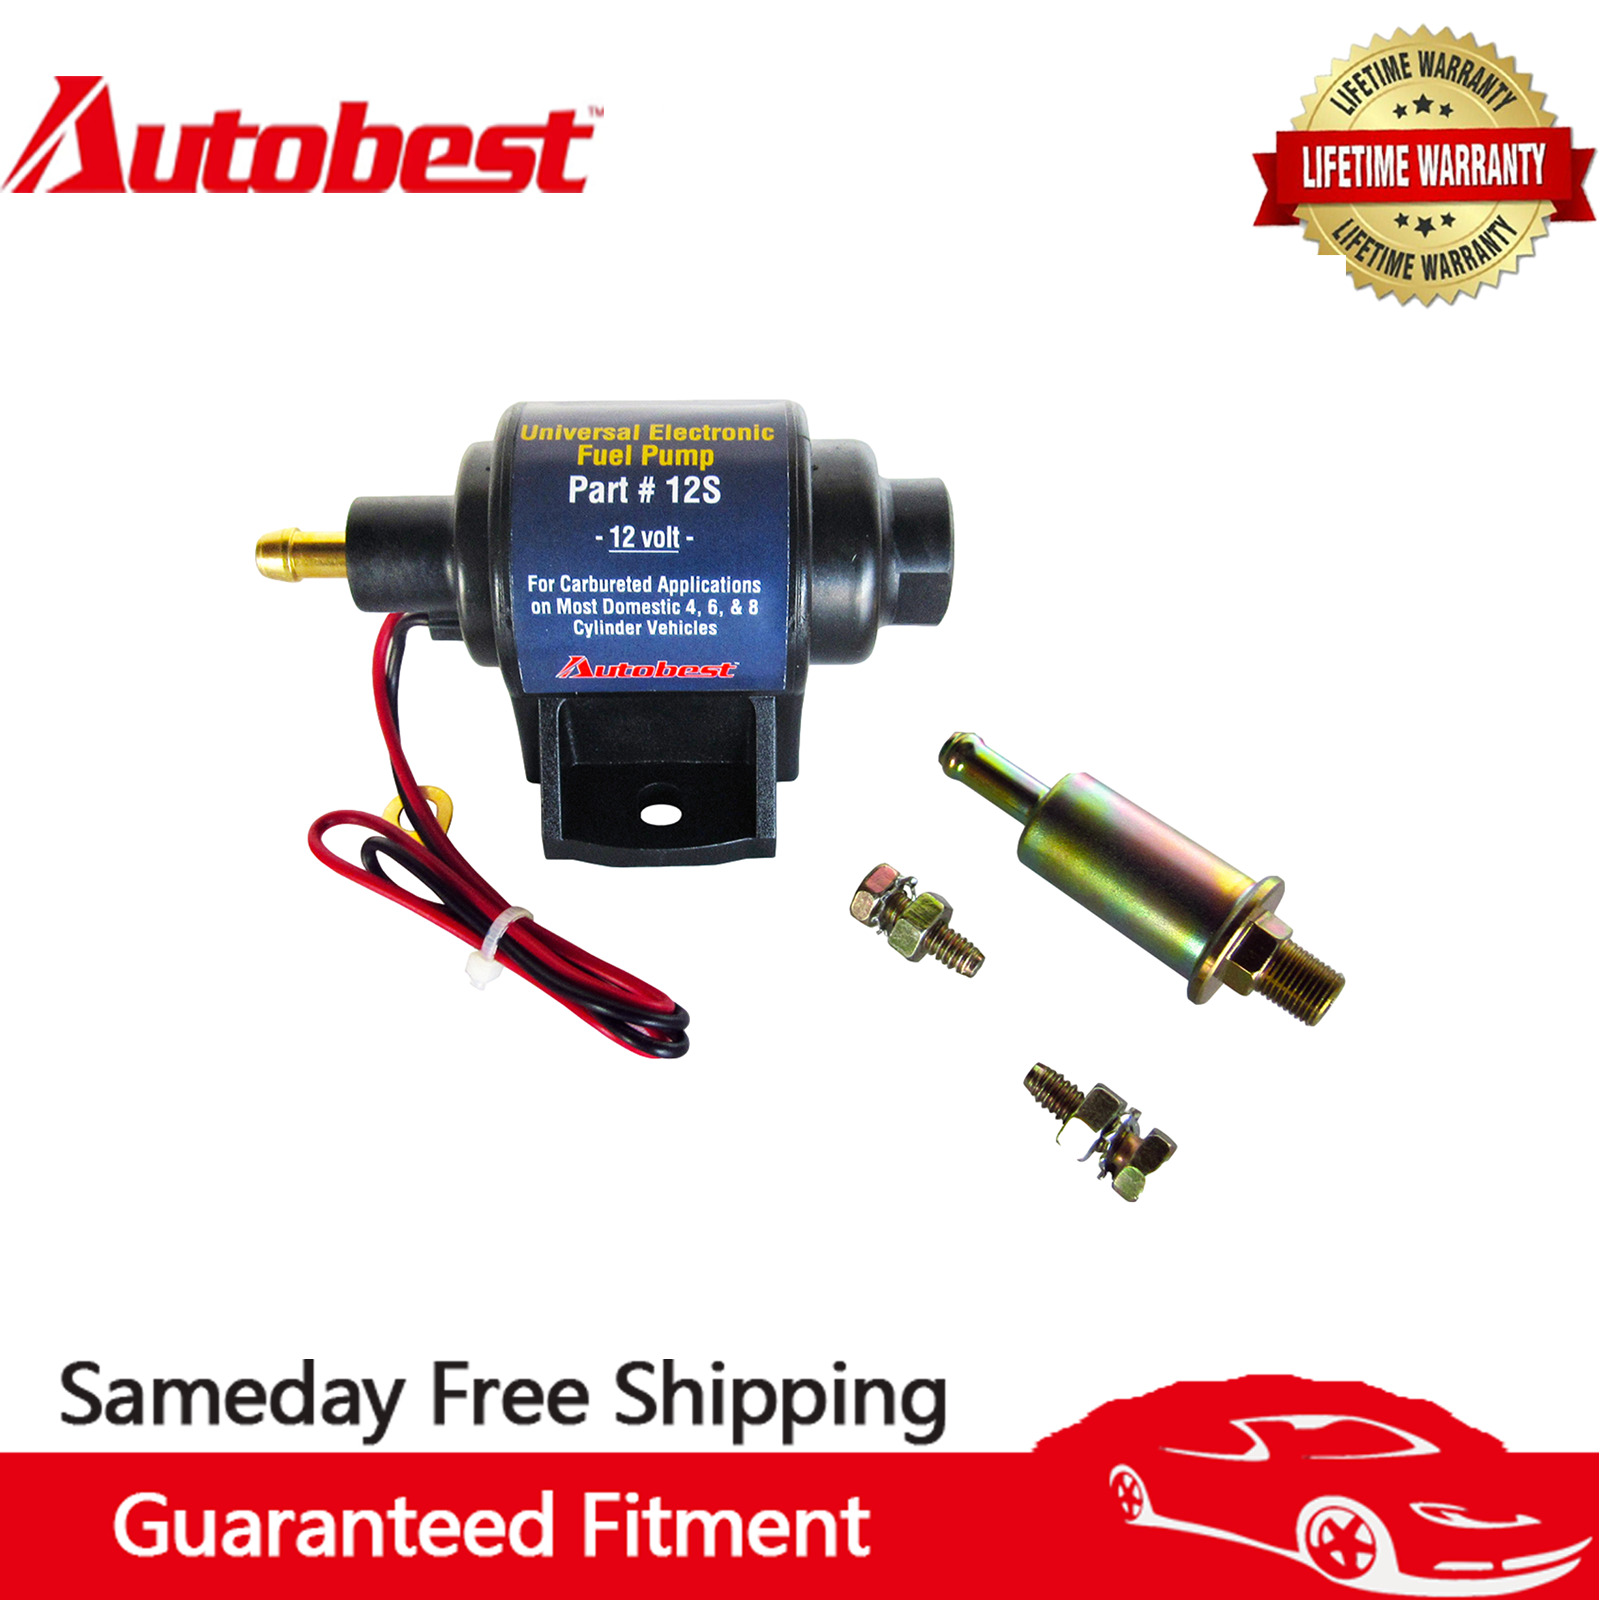 Autobest 12S Electric Transfer Pump For Universal 12V Application 35 GPH